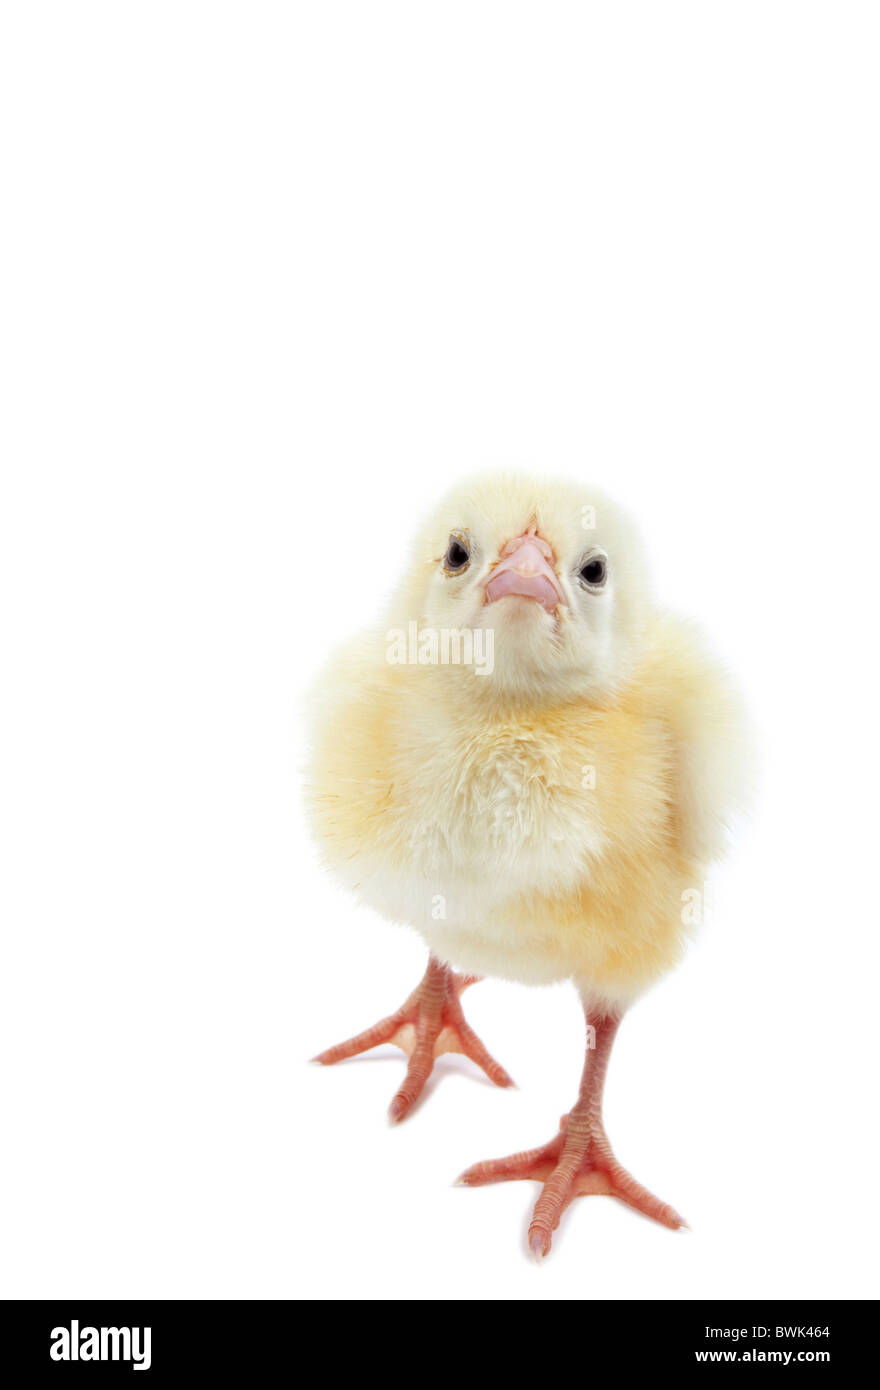 chick on isolated white background Stock Photo